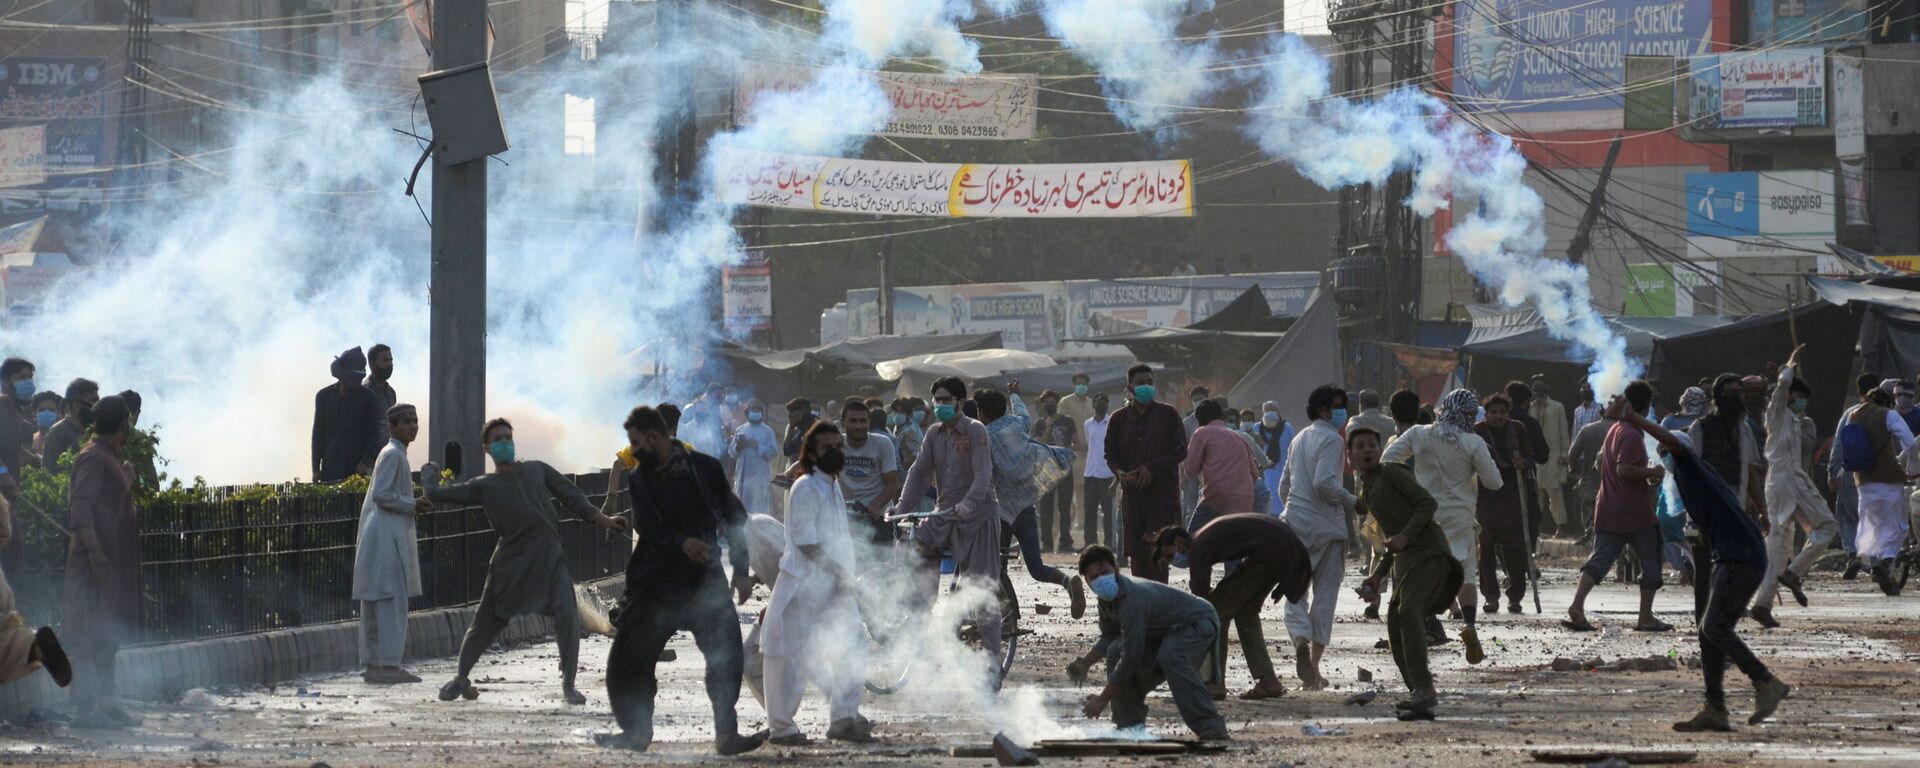 Supporters of the Tehreek-e-Labaik Pakistan (TLP) Islamist political party throwback tear gas canisters fired by police during a protest against the arrest of their leader in Lahore, Pakistan April 13, 2021. - Sputnik International, 1920, 05.11.2021